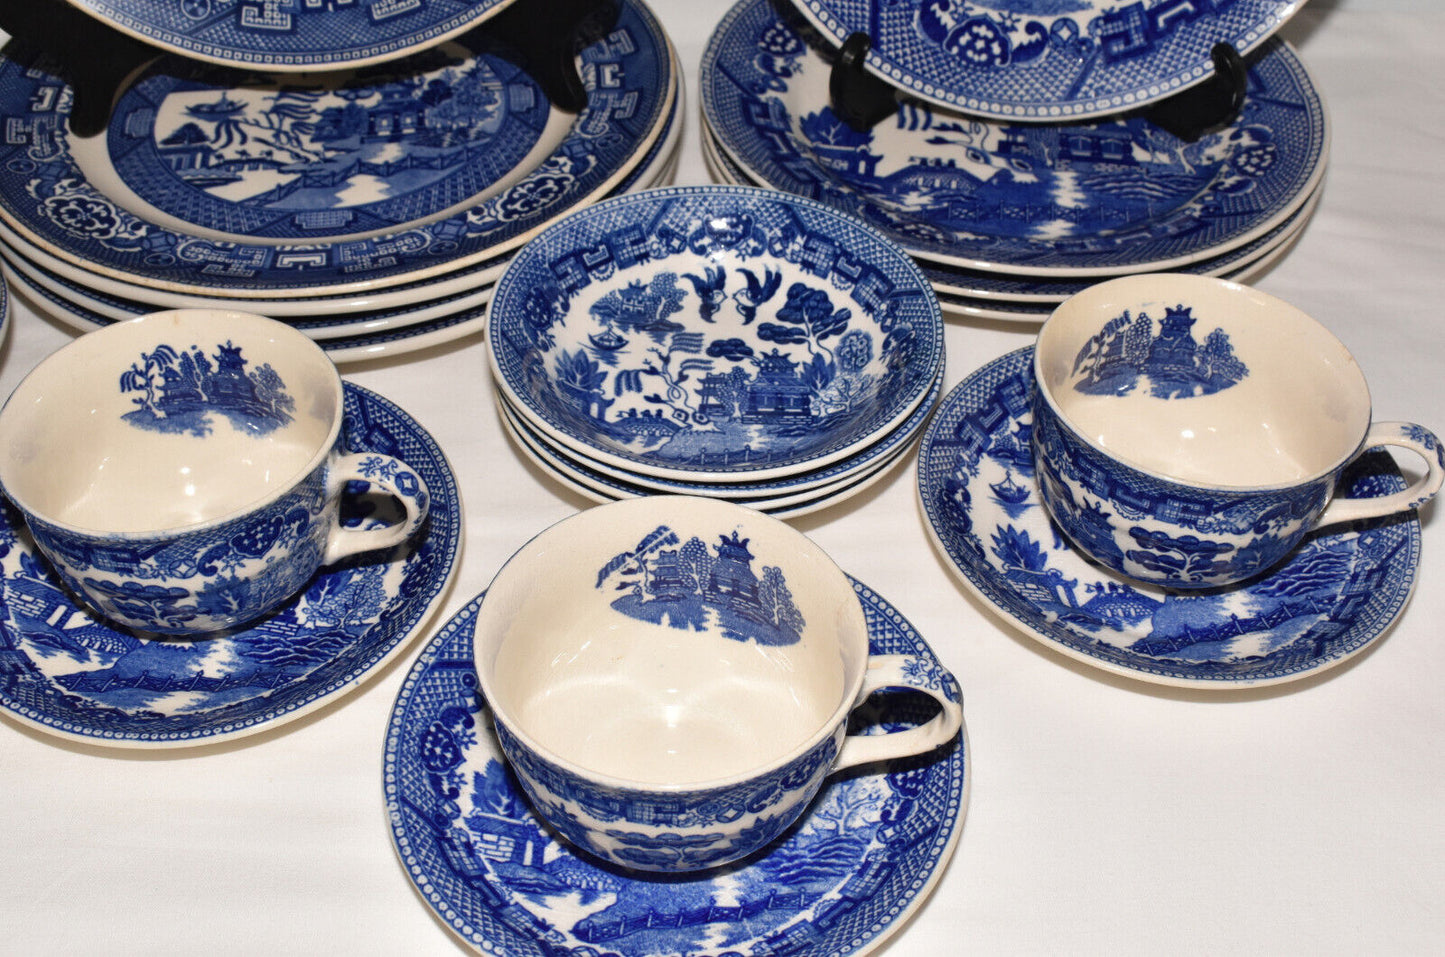 Vintage Blue Willow China Dinnerware 29pcs Service for 4 Blue & White Dishes Set 1